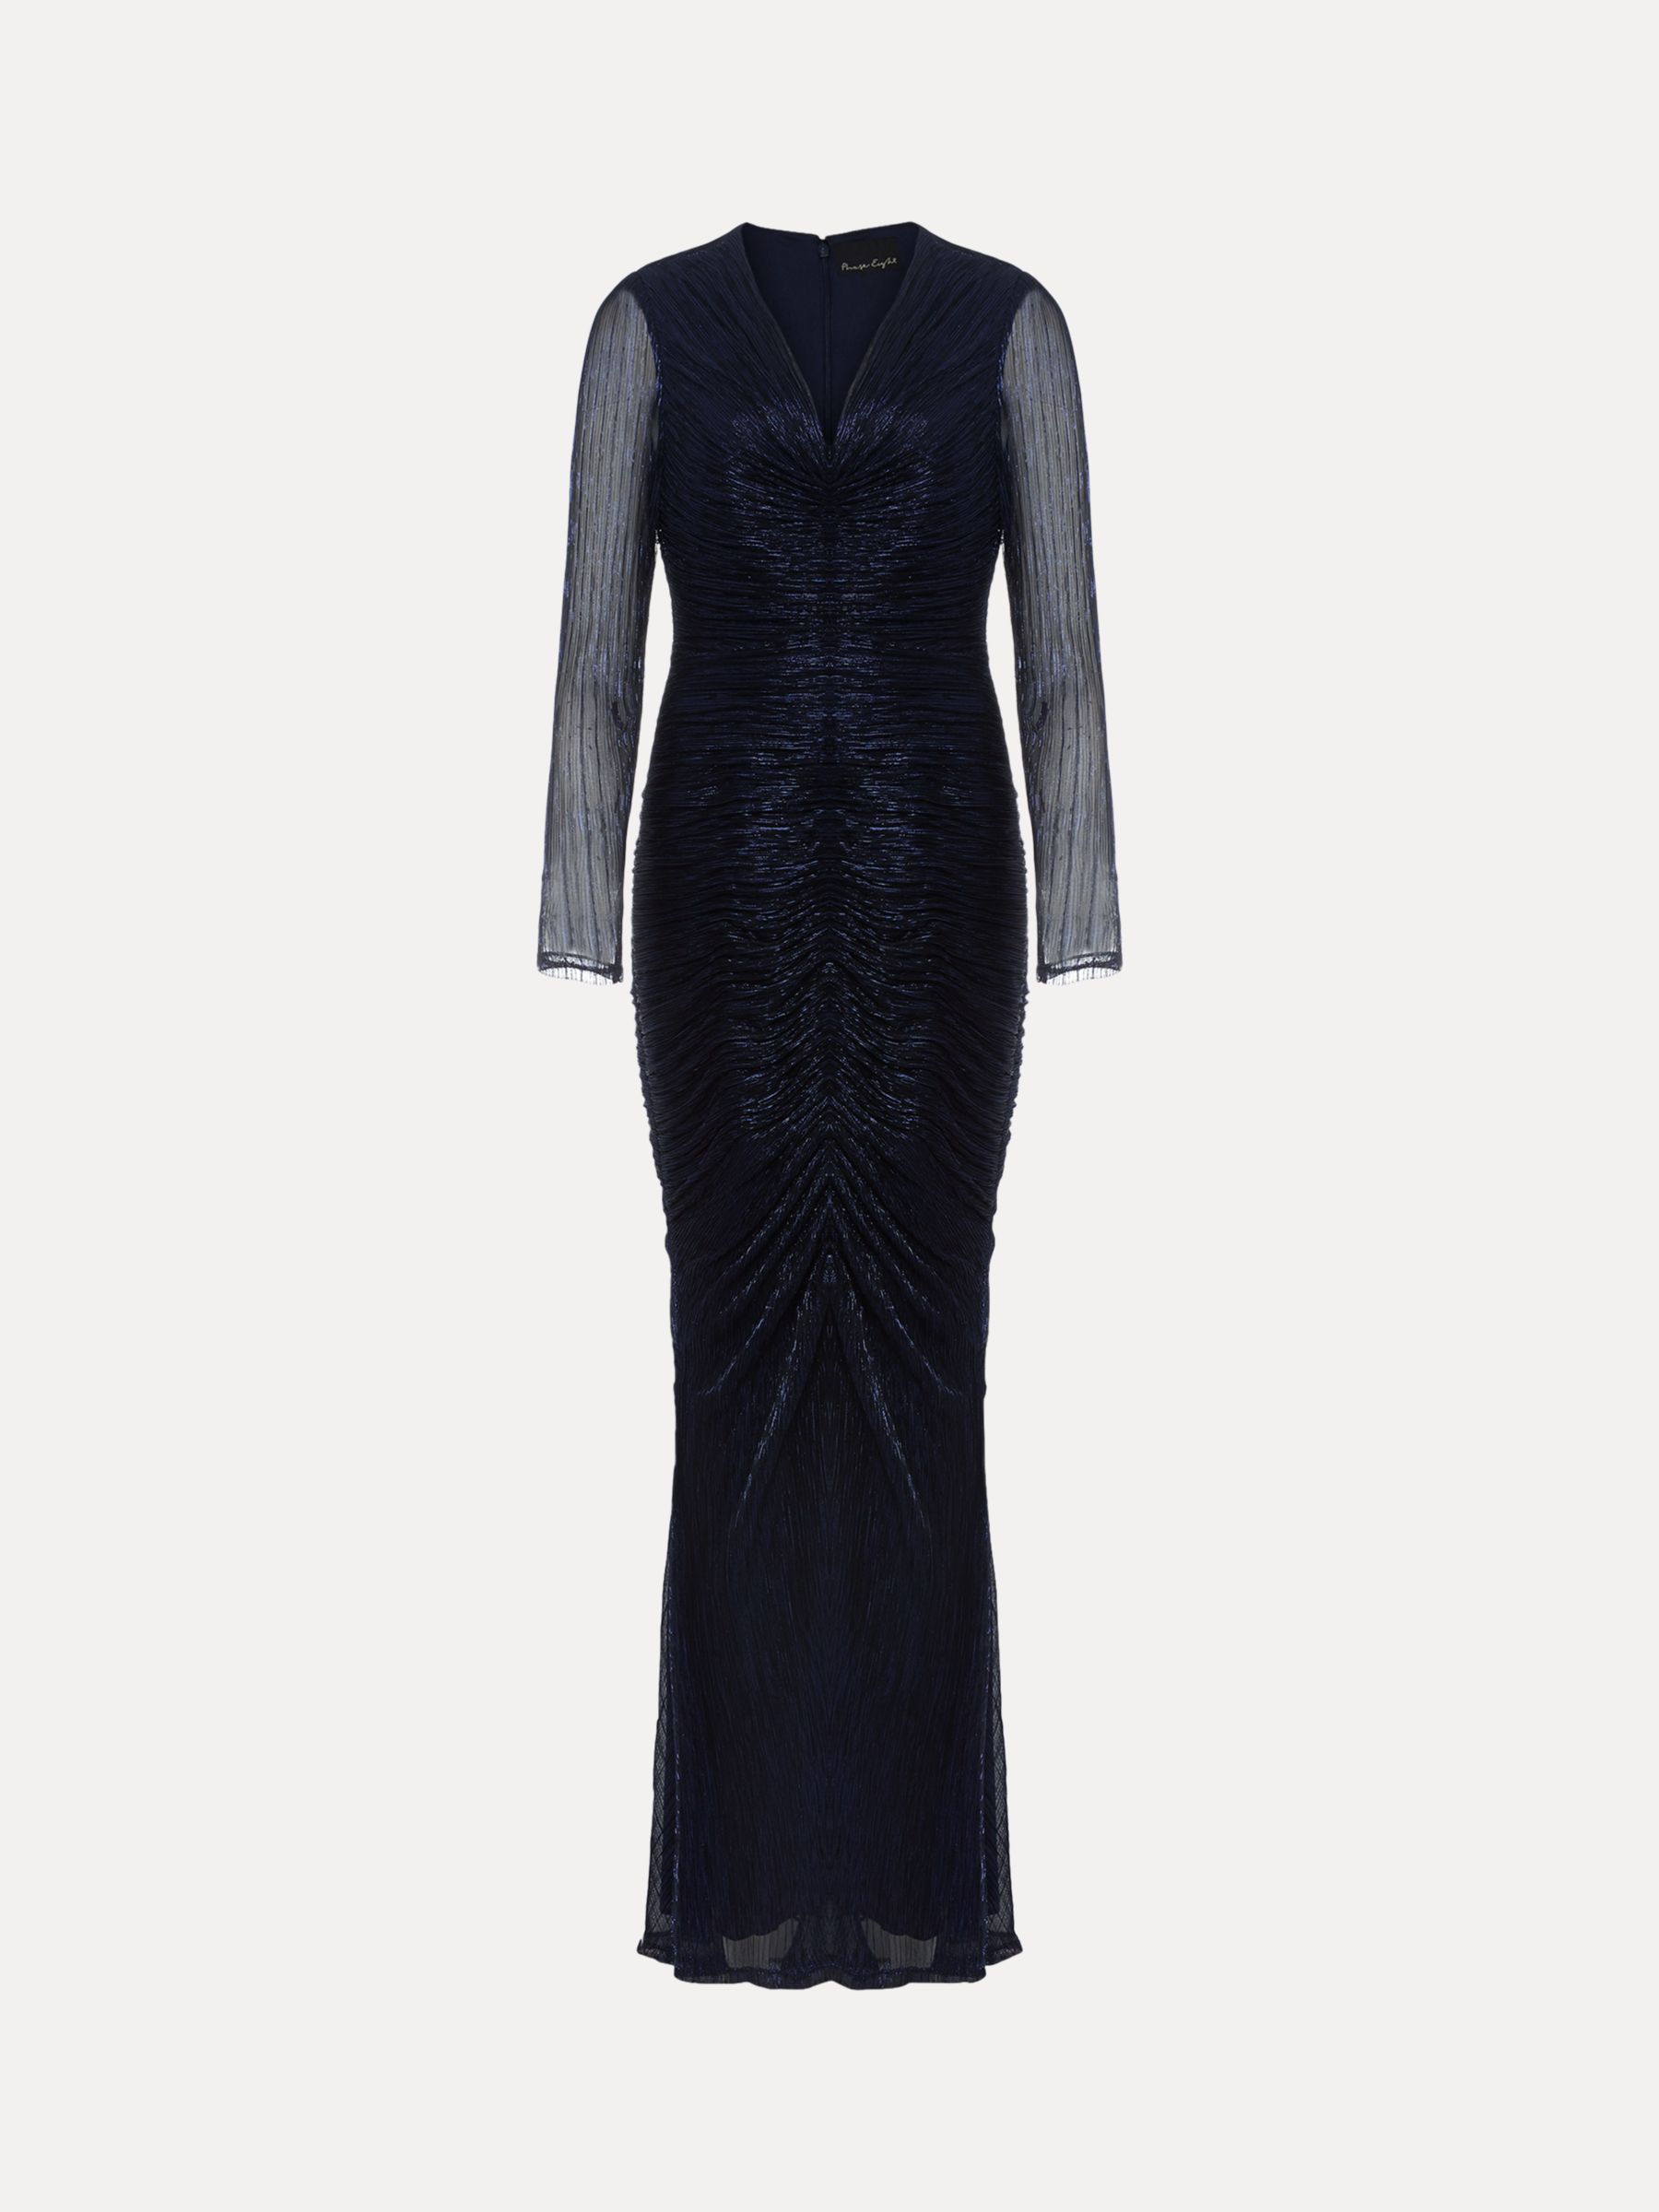 Buy Phase Eight Shannia Ruched Maxi Dress, Blue Online at johnlewis.com